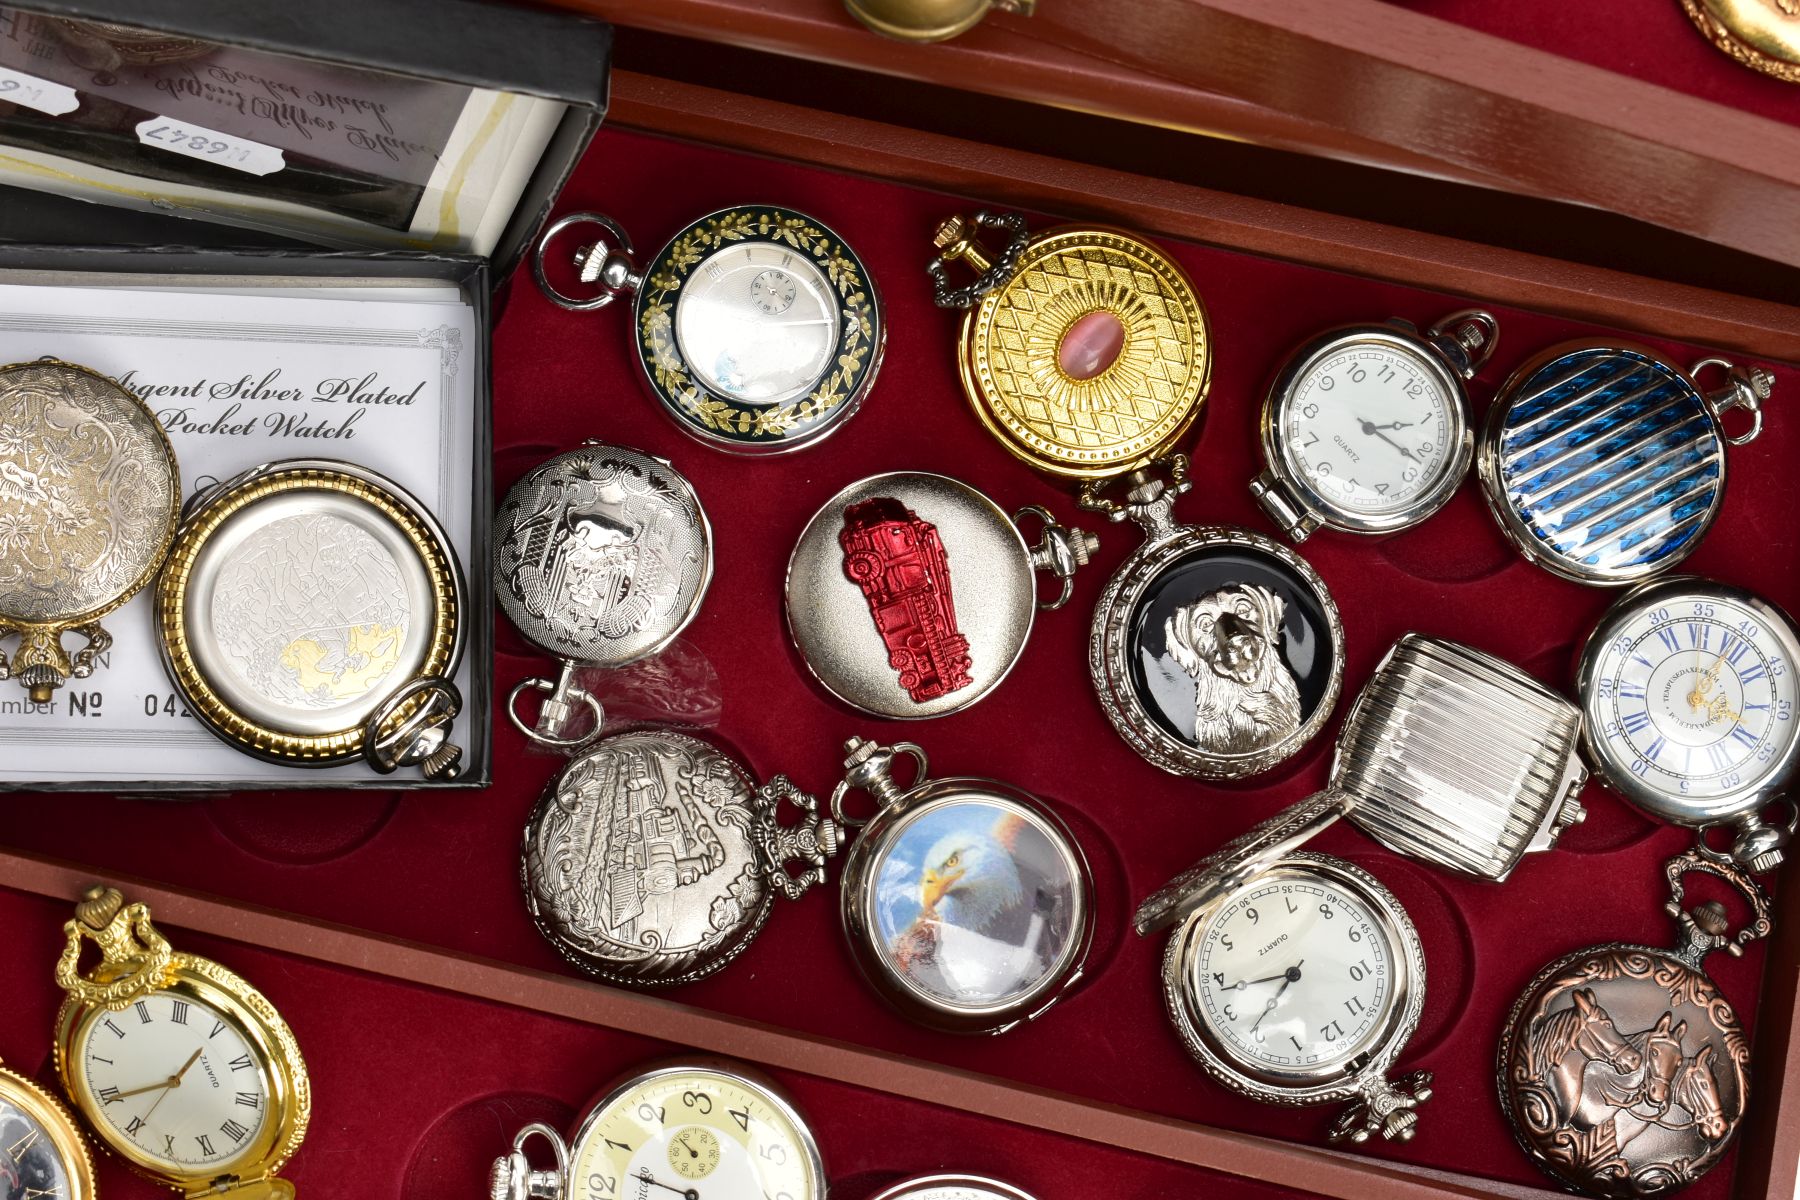 A WOODEN DISPLAY BOX OF NOVELTY POCKET WATCHES, wooden display box with three draws and a glass - Image 3 of 5